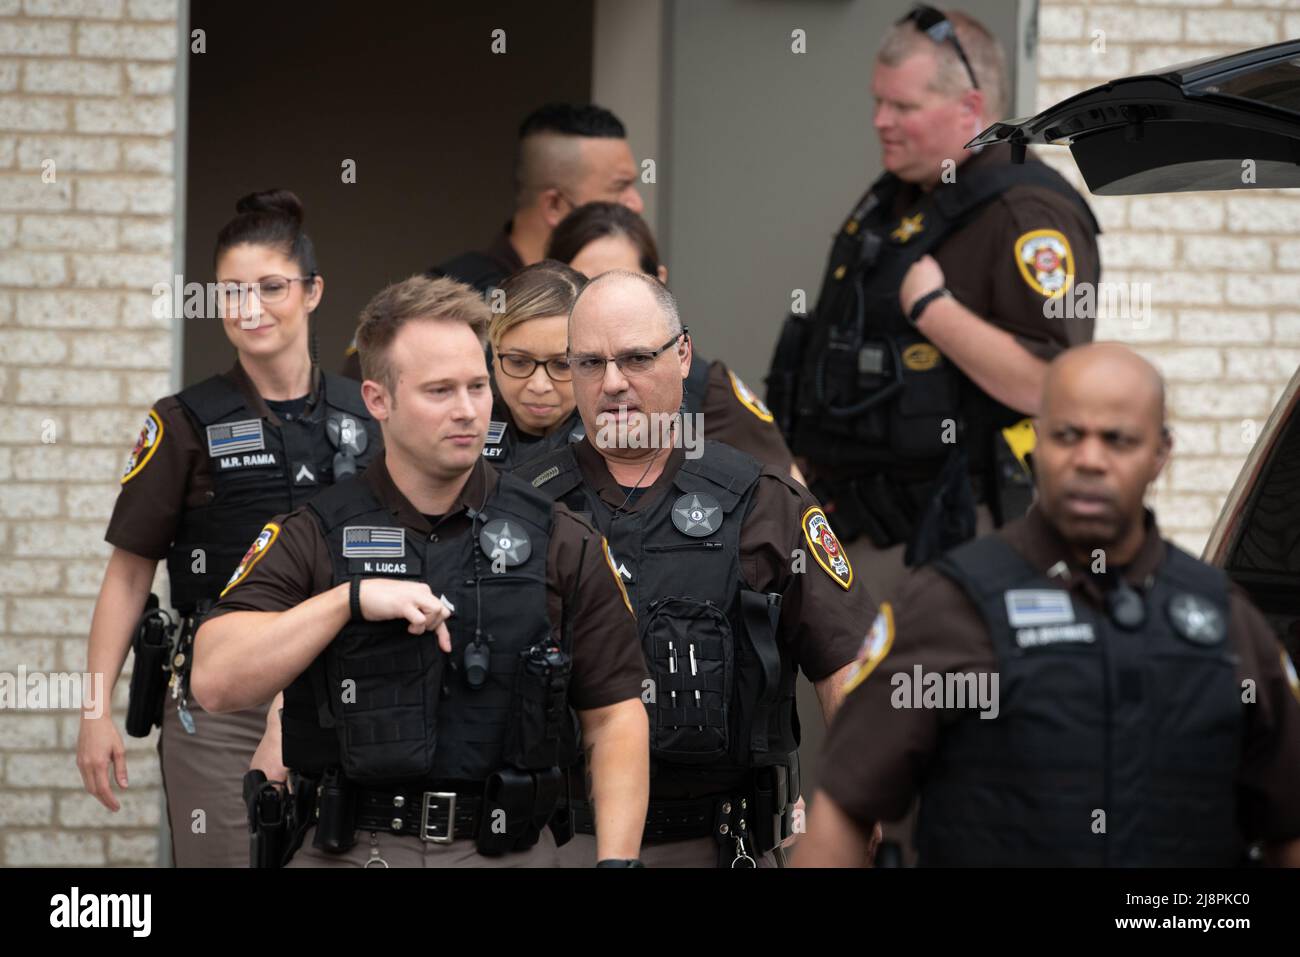 Fairfax County Sheriff's Deputies exit the courthouse to provide crowd control for Johnny Depp and Amber Hearts departure from the Fairfax County Courthouse, in Fairfax, at the close of another day in his civil trial with Amber Heard, Thursday, May 5, 2022. Depp brought a defamation lawsuit against his former wife, actress Amber Heard, after she wrote an op-ed in The Washington Post in 2018 that, without naming Depp, accused him of domestic abuse.Credit: Cliff Owen/CNP/Sipa USA (RESTRICTION: NO New York or New Jersey Newspapers or newspapers within a 75 mile radius of New York City) Stock Photo